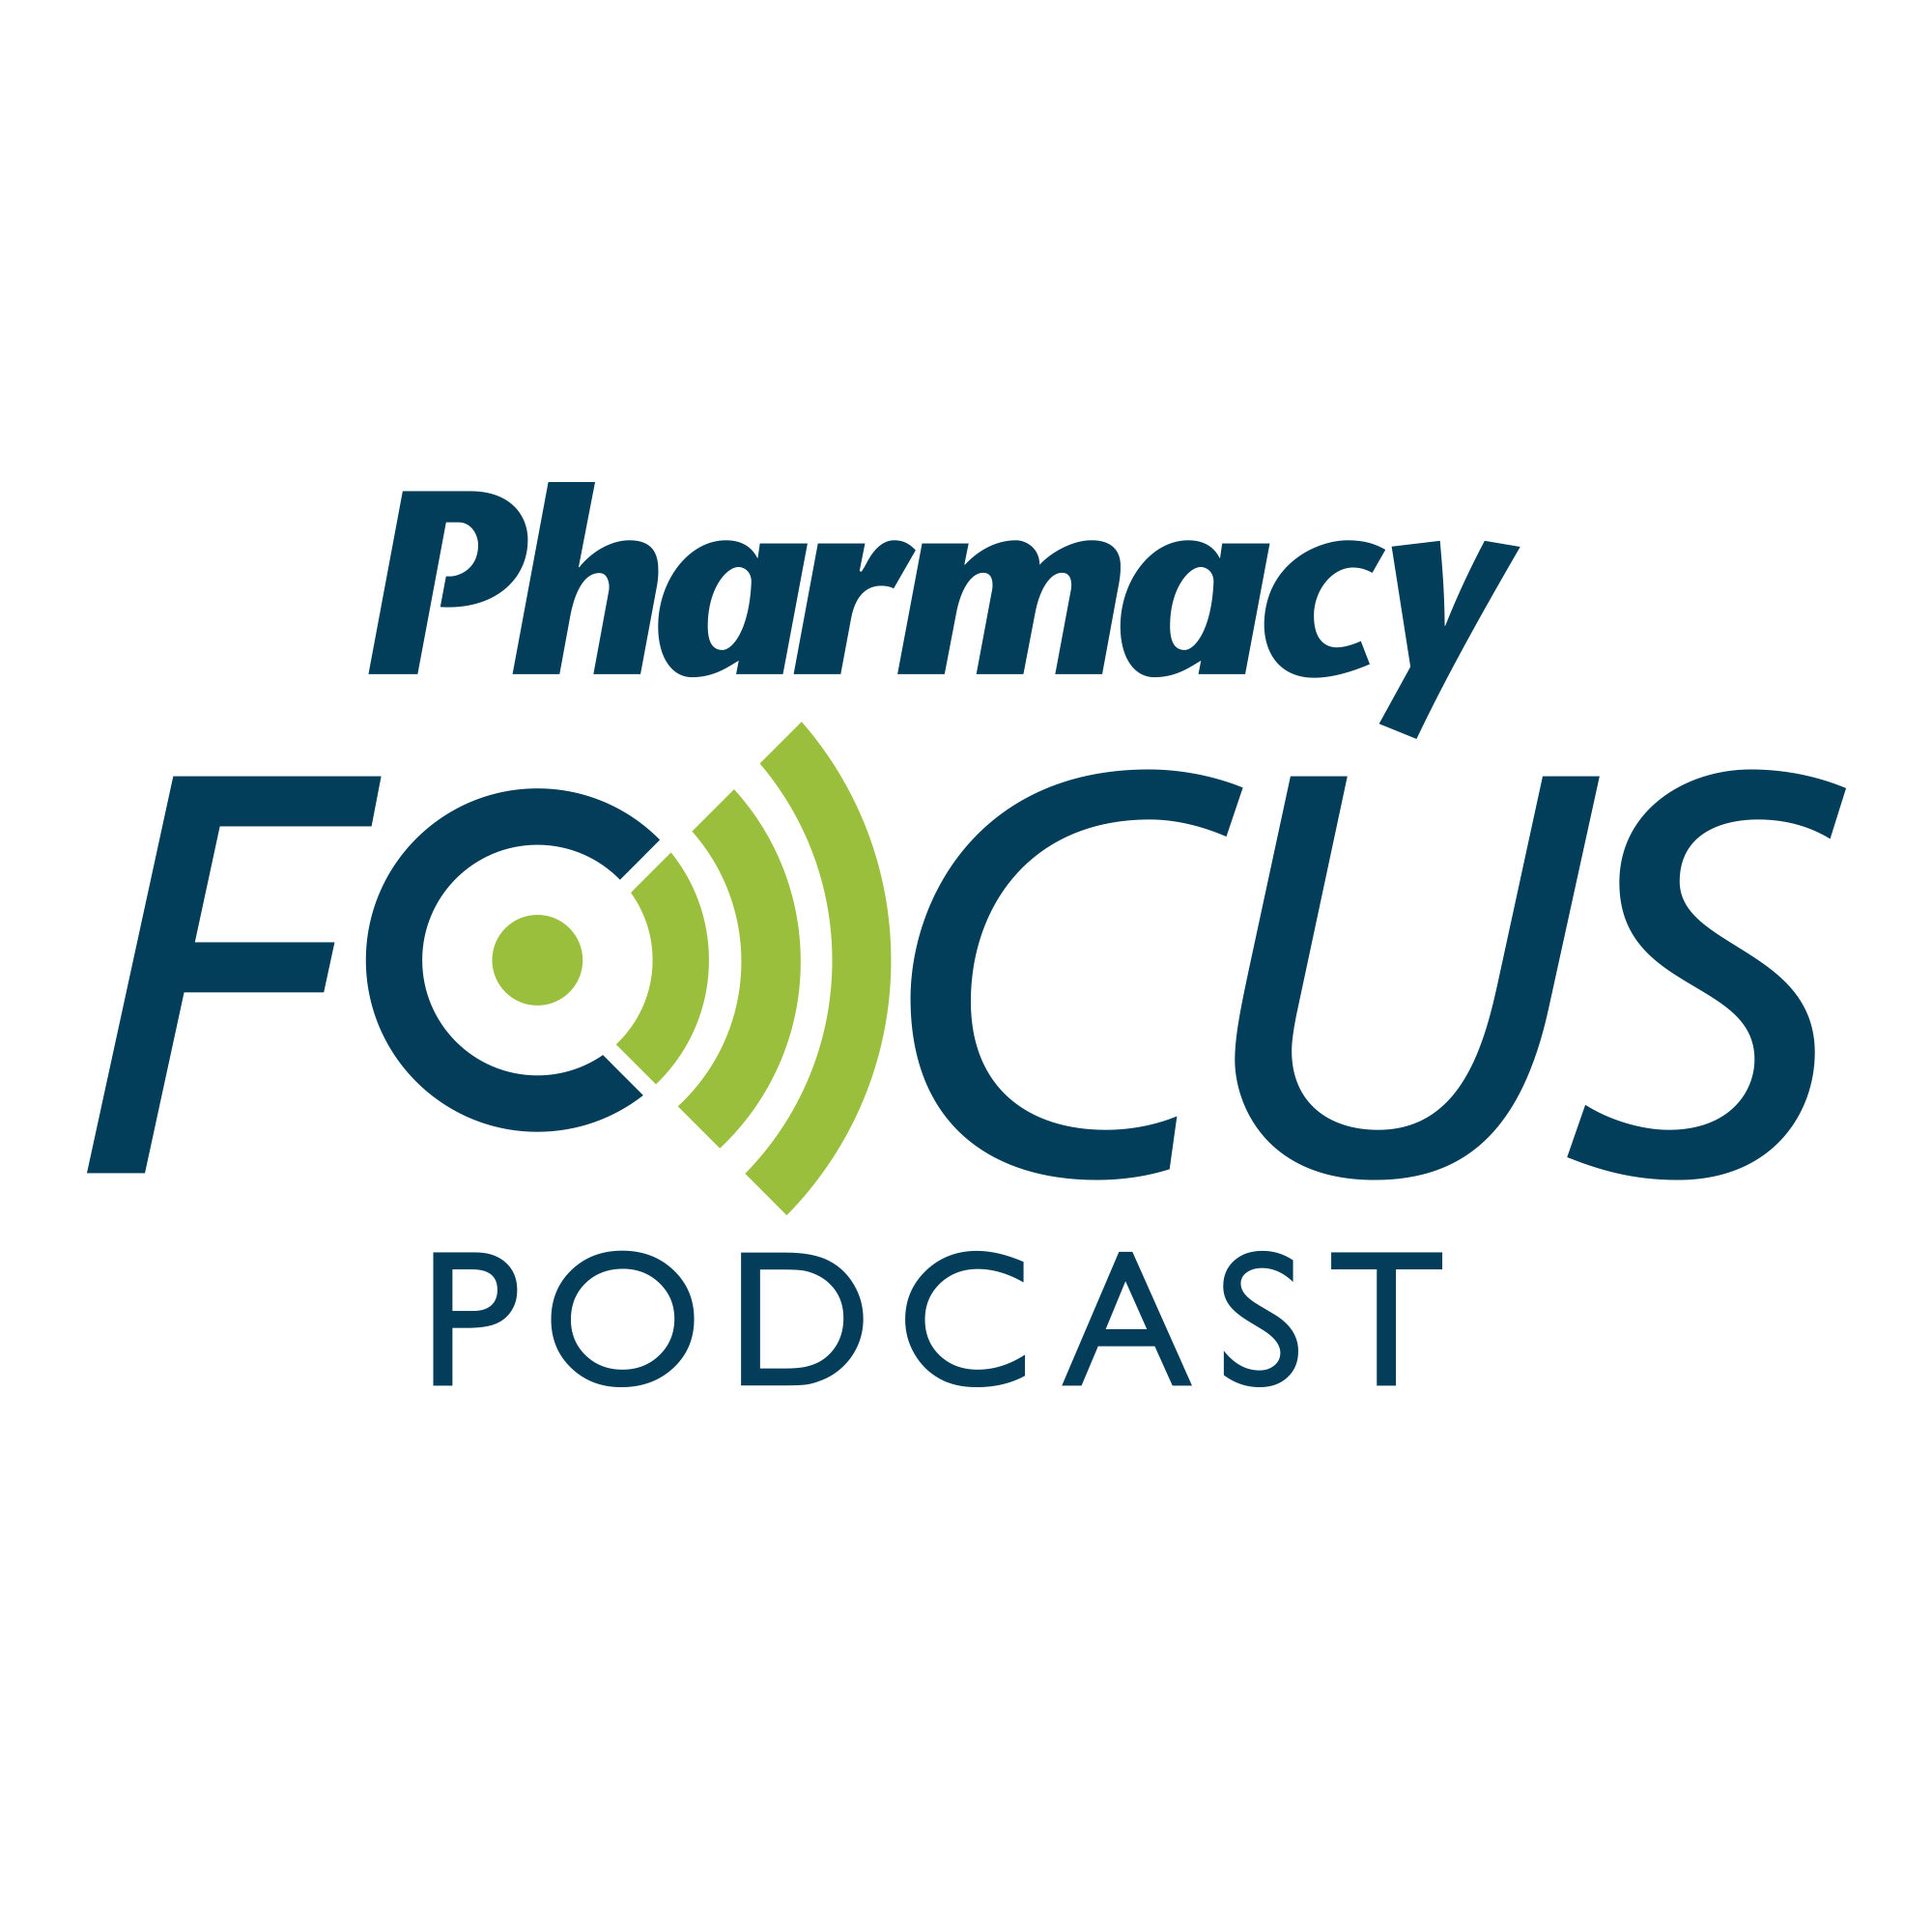 Pharmacy Focus Episode 49: Inpatient Insulin Management from the Pharmacy Perspective